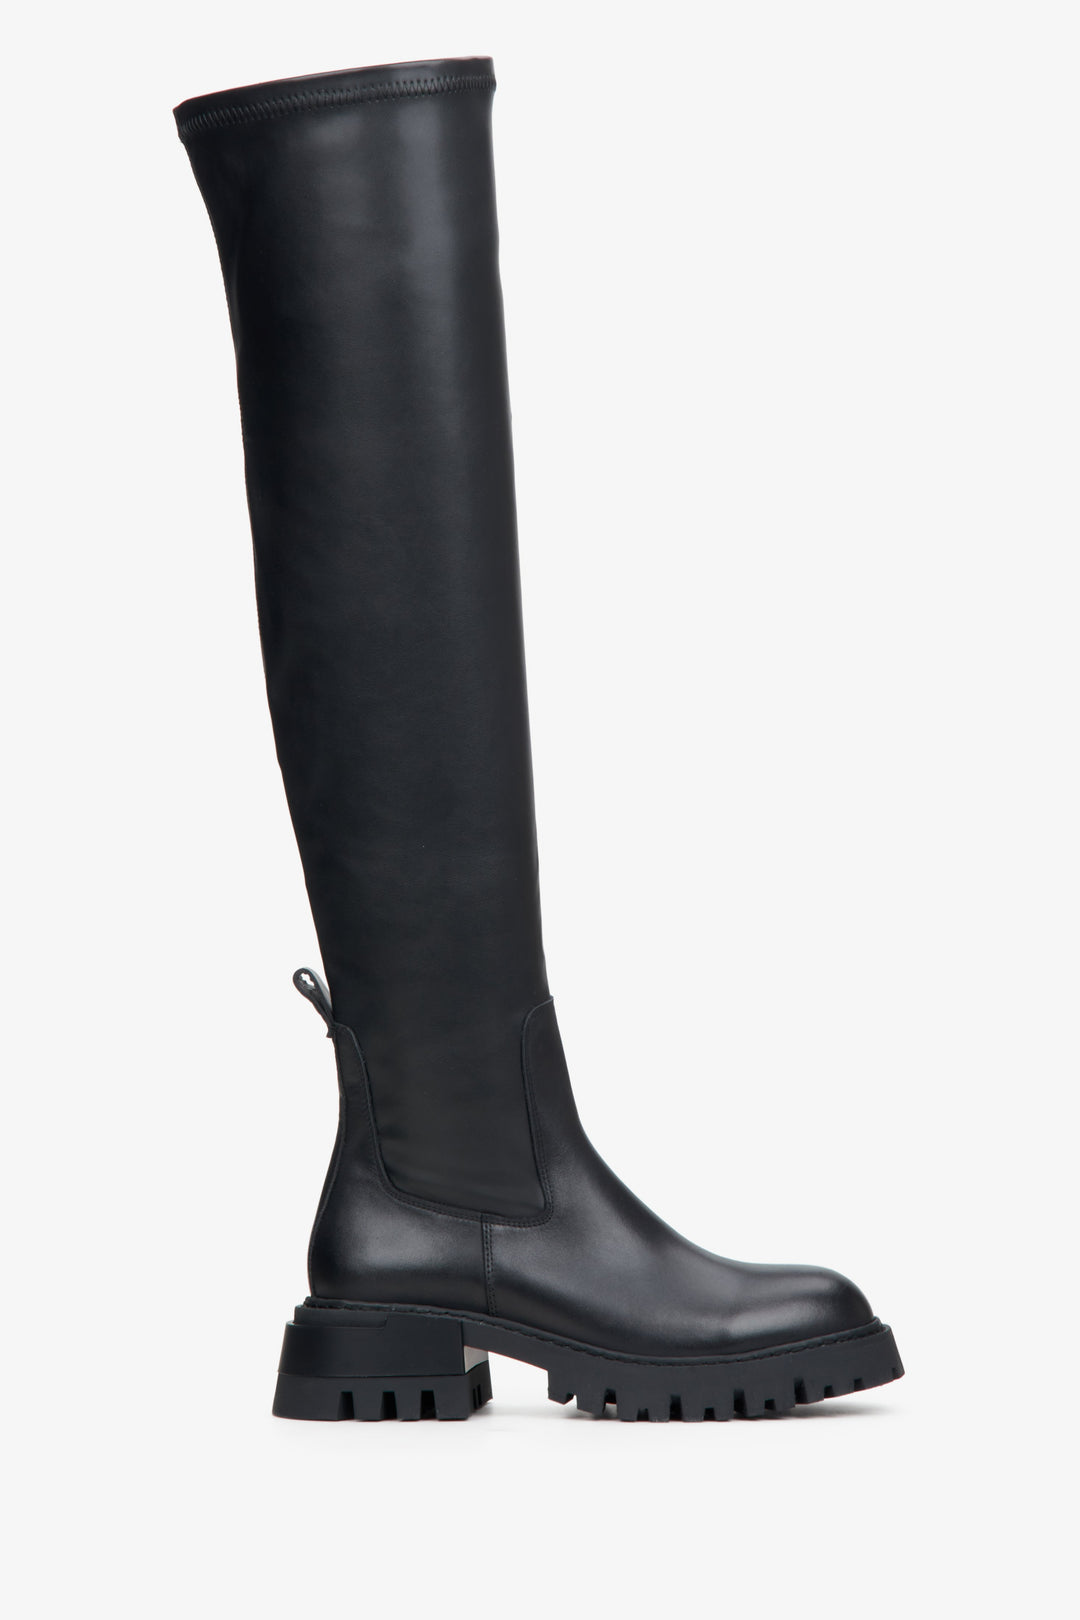 Women's Black Knee-High Boots made of Genuine Leather with Soft Shaft Estro ER00114696.